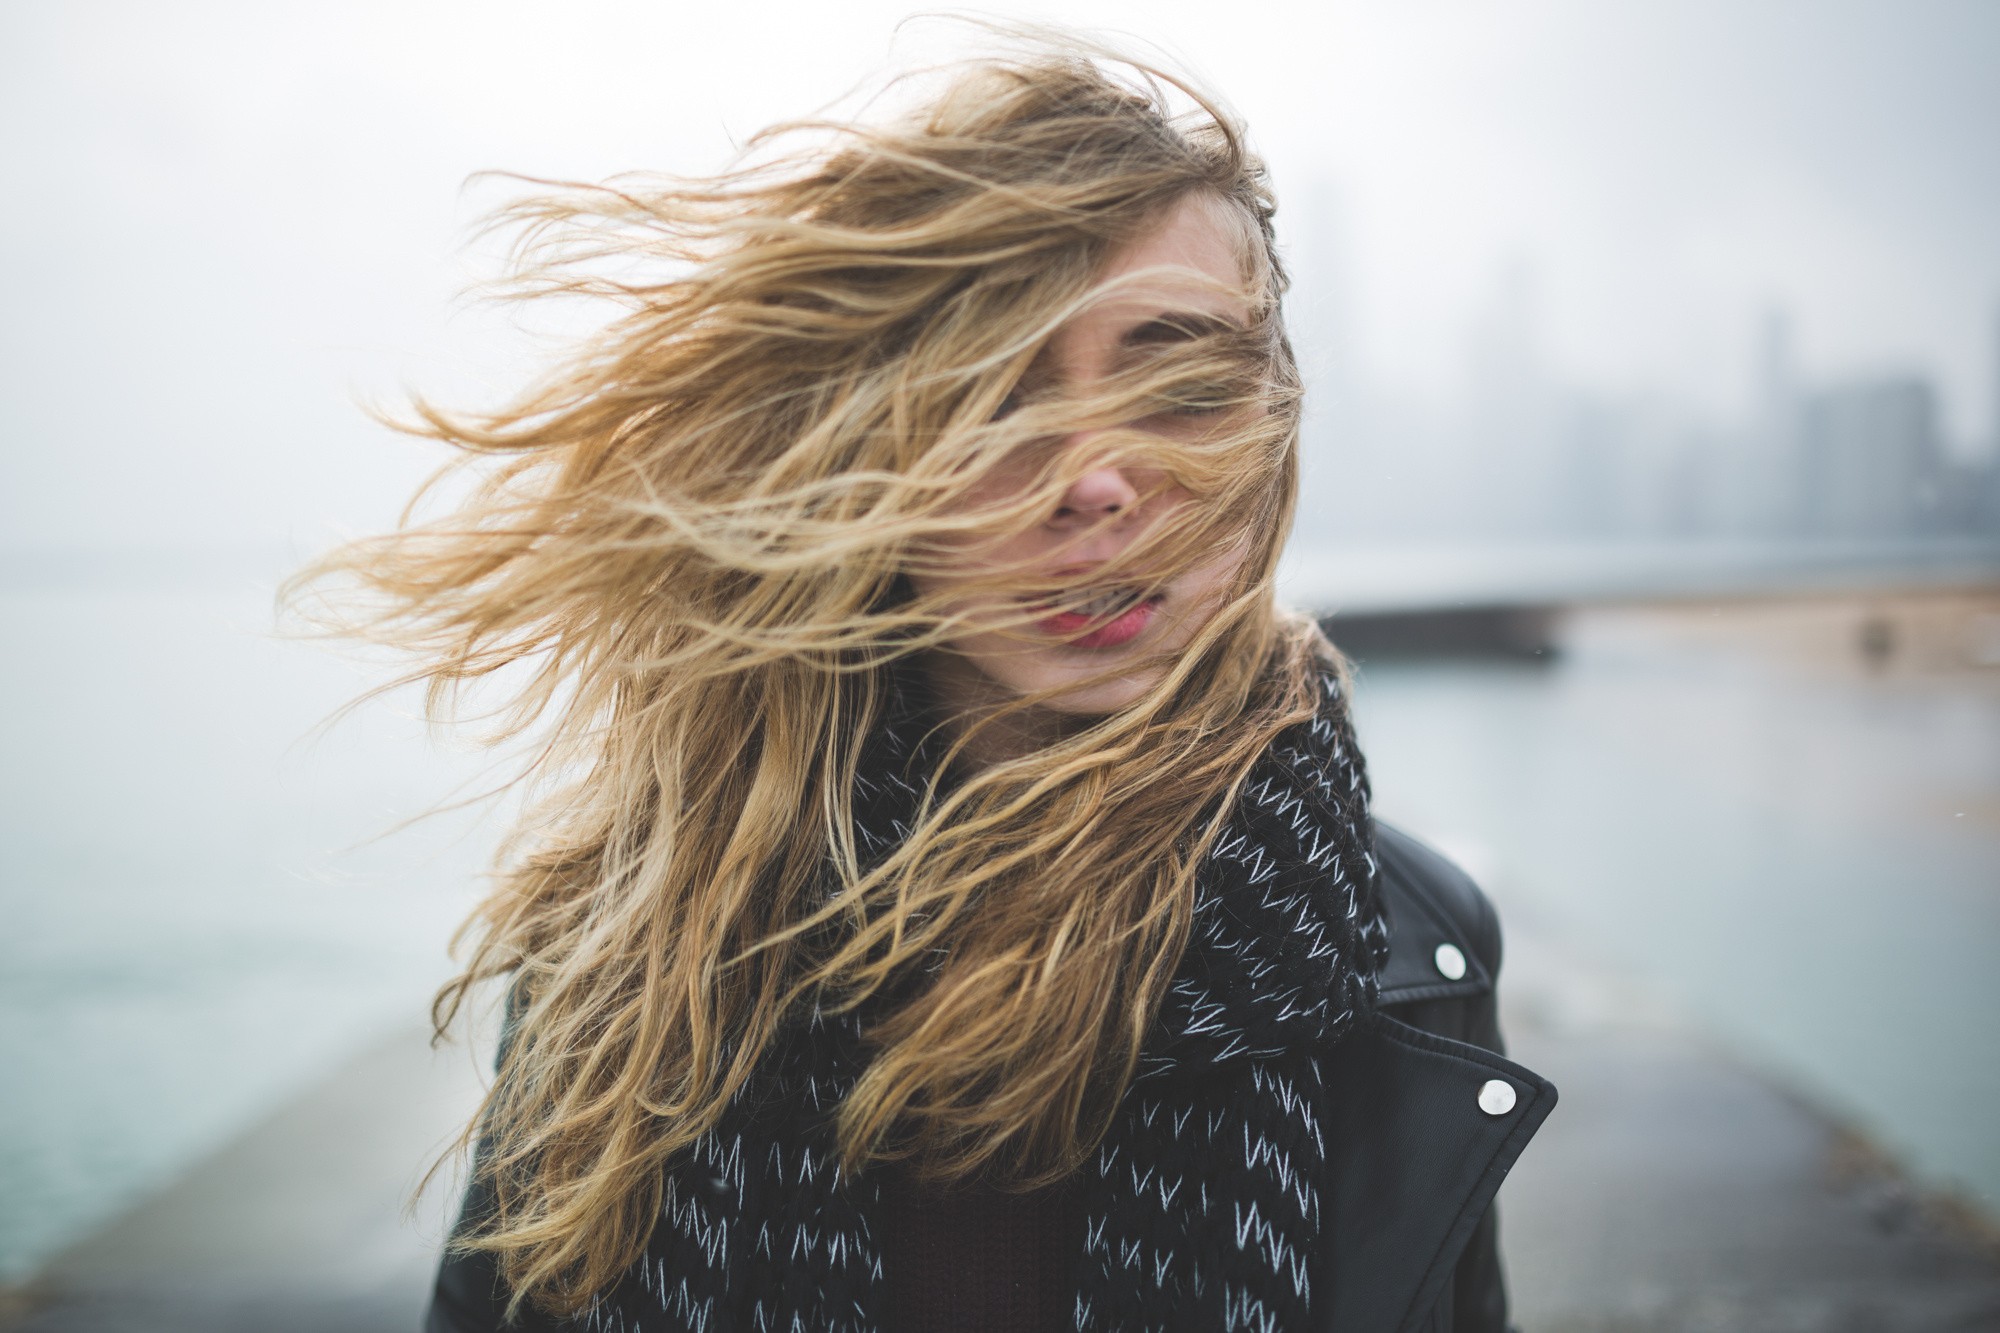 People 2000x1333 women hair in face windy scarf hair blowing in the wind sadness Summertime Sadness hair covering eyes women outdoors long hair